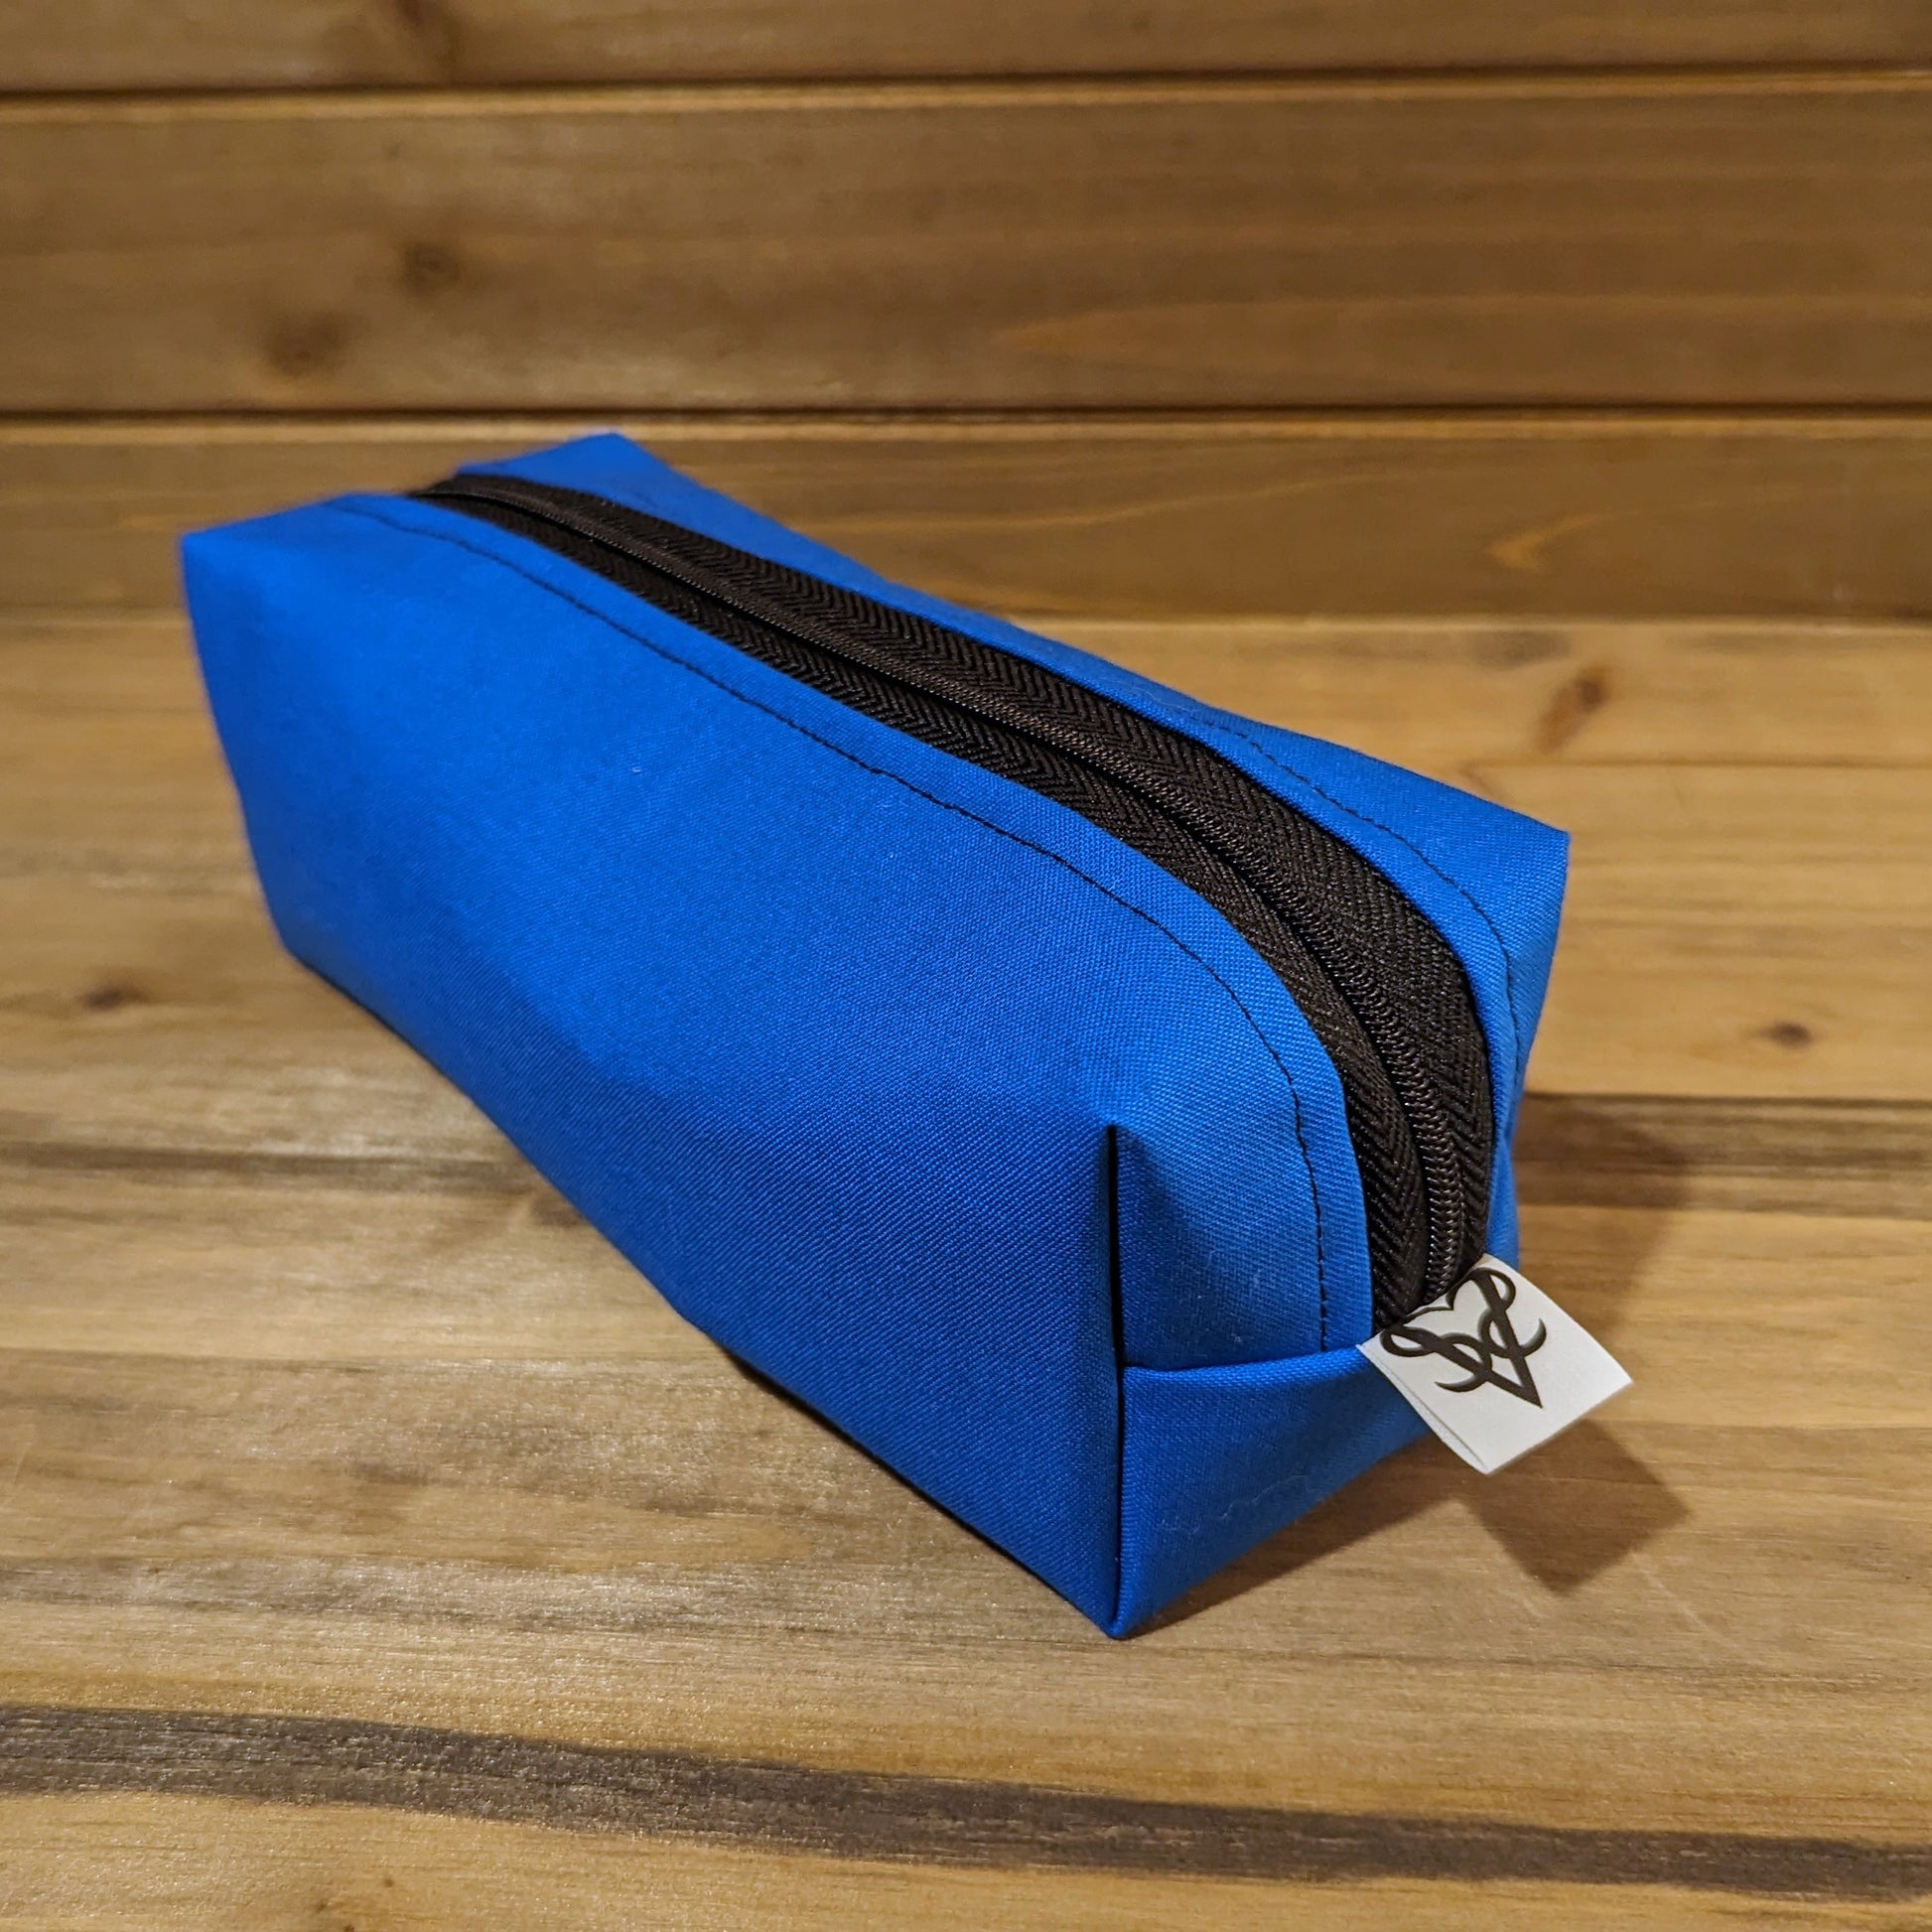 The Bag of Devouring in blue showing the square side with the Aras Sivad Studio logo on the end.